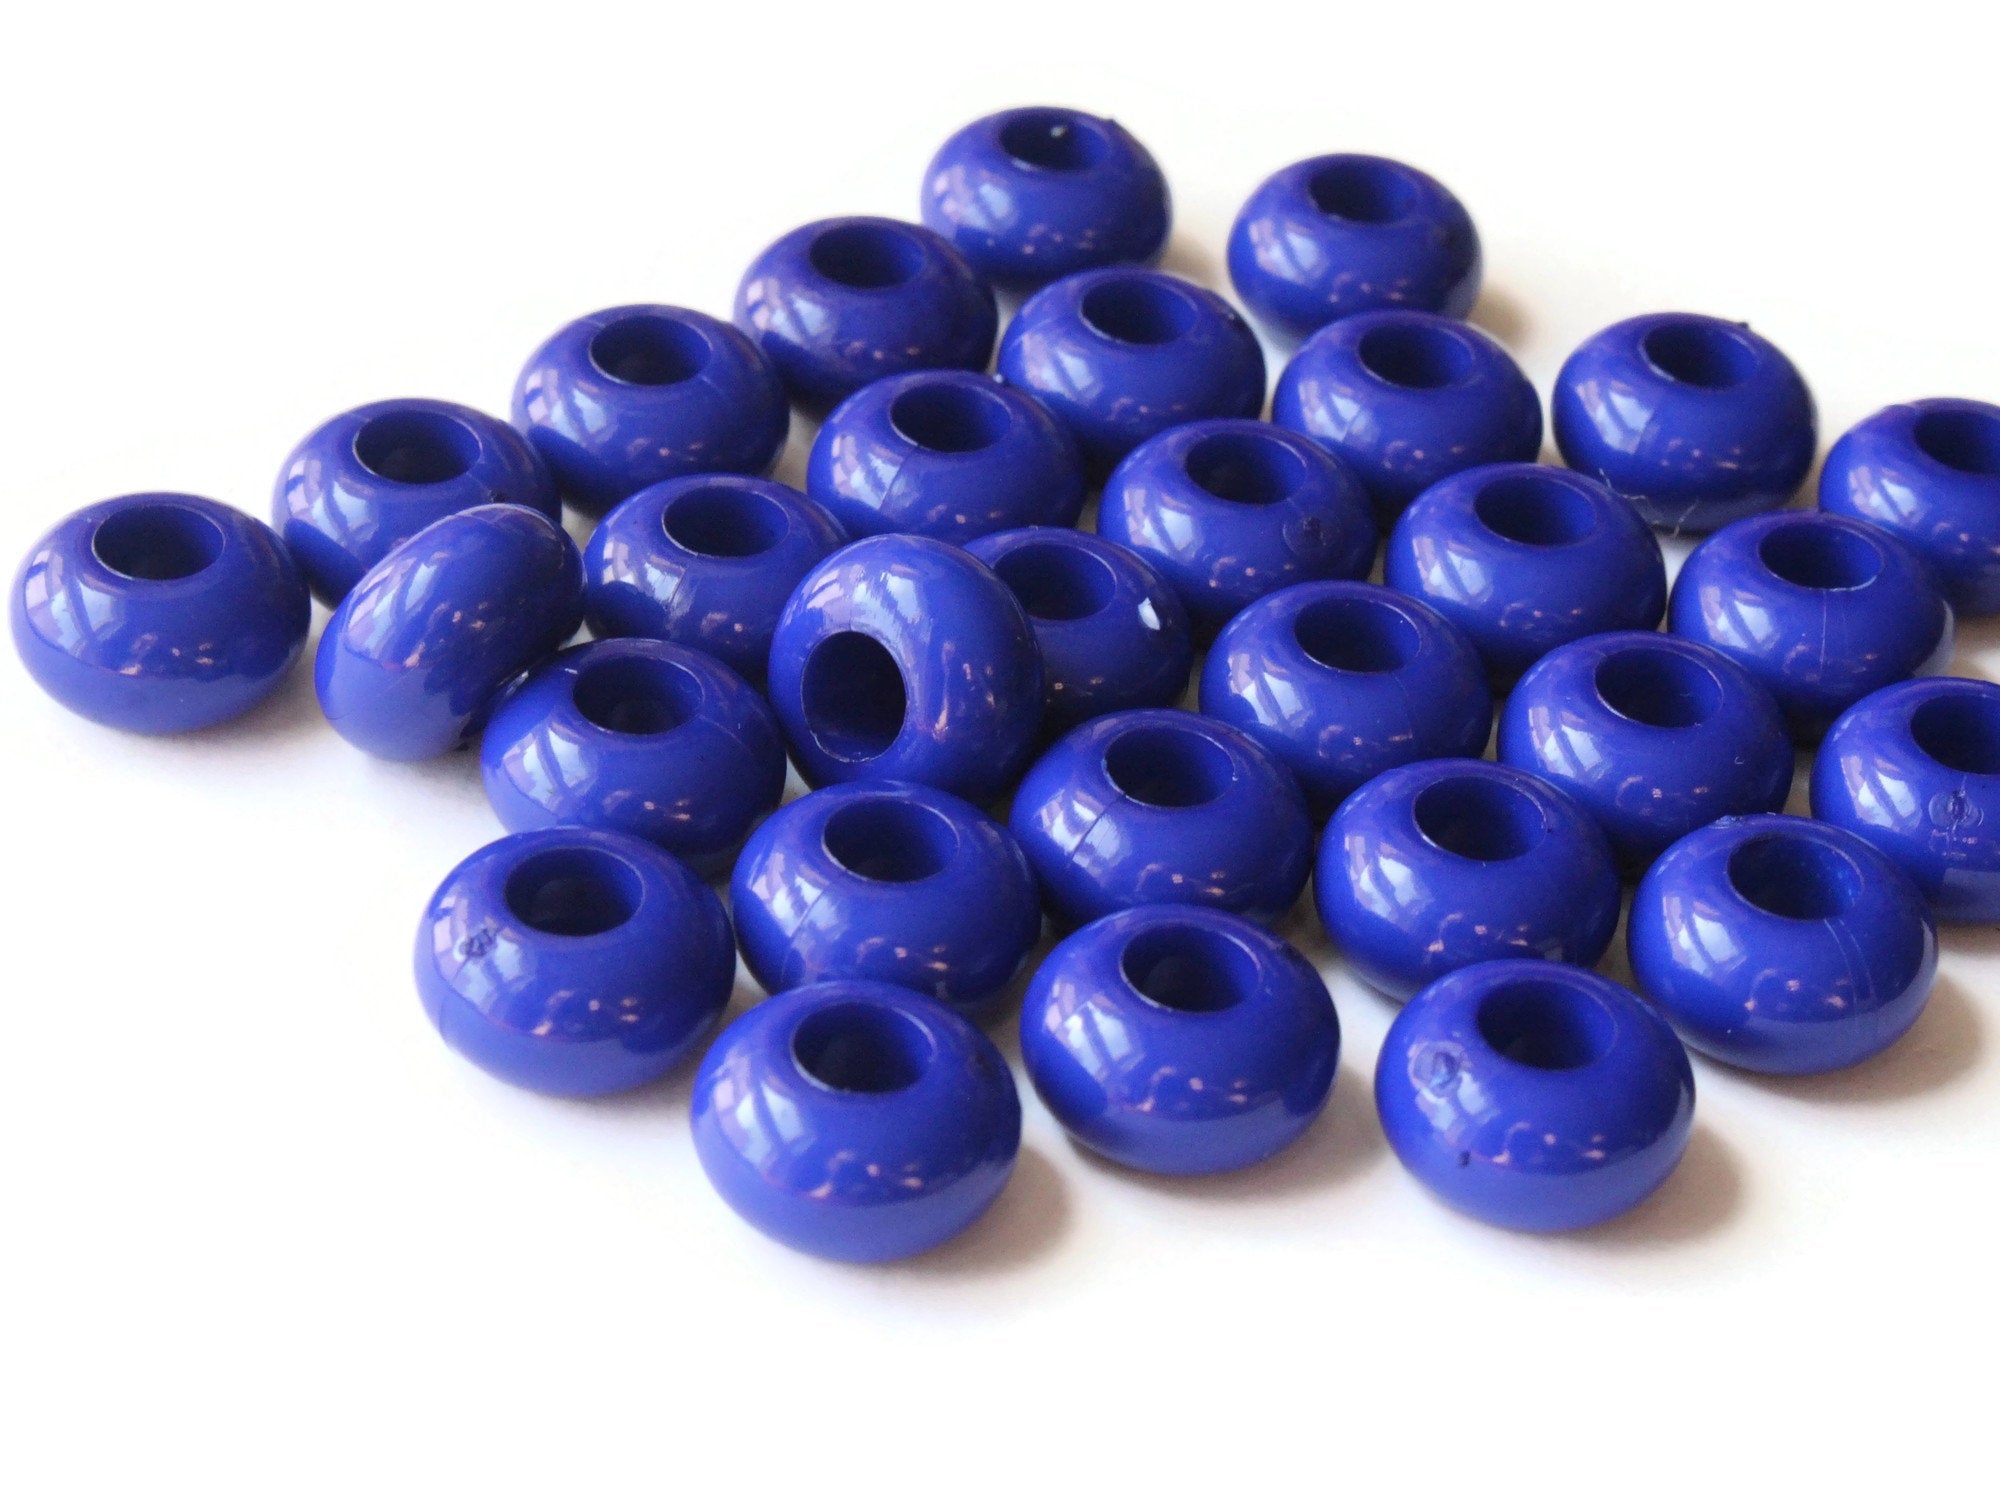 40 12mm Large Hole Royal Blue Round Plastic Pearl Beads by Smileyboy Beads | Michaels